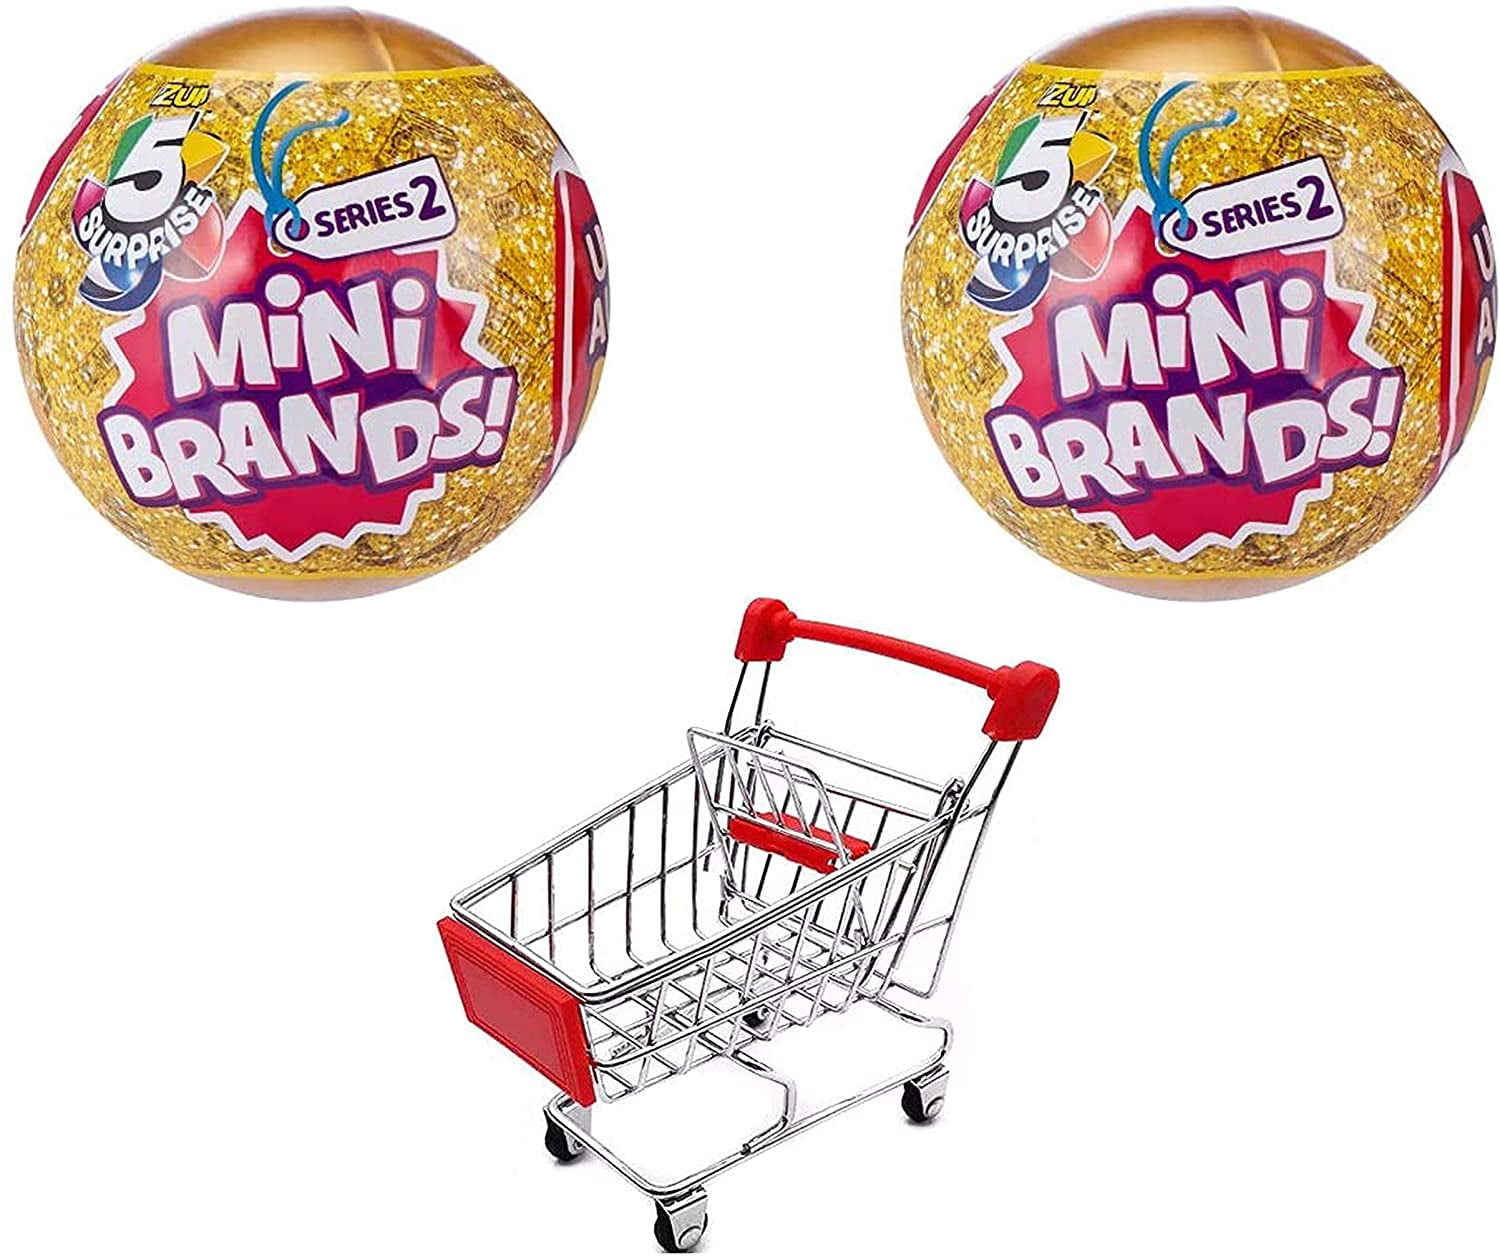 Mini brands your kids will go crazy for